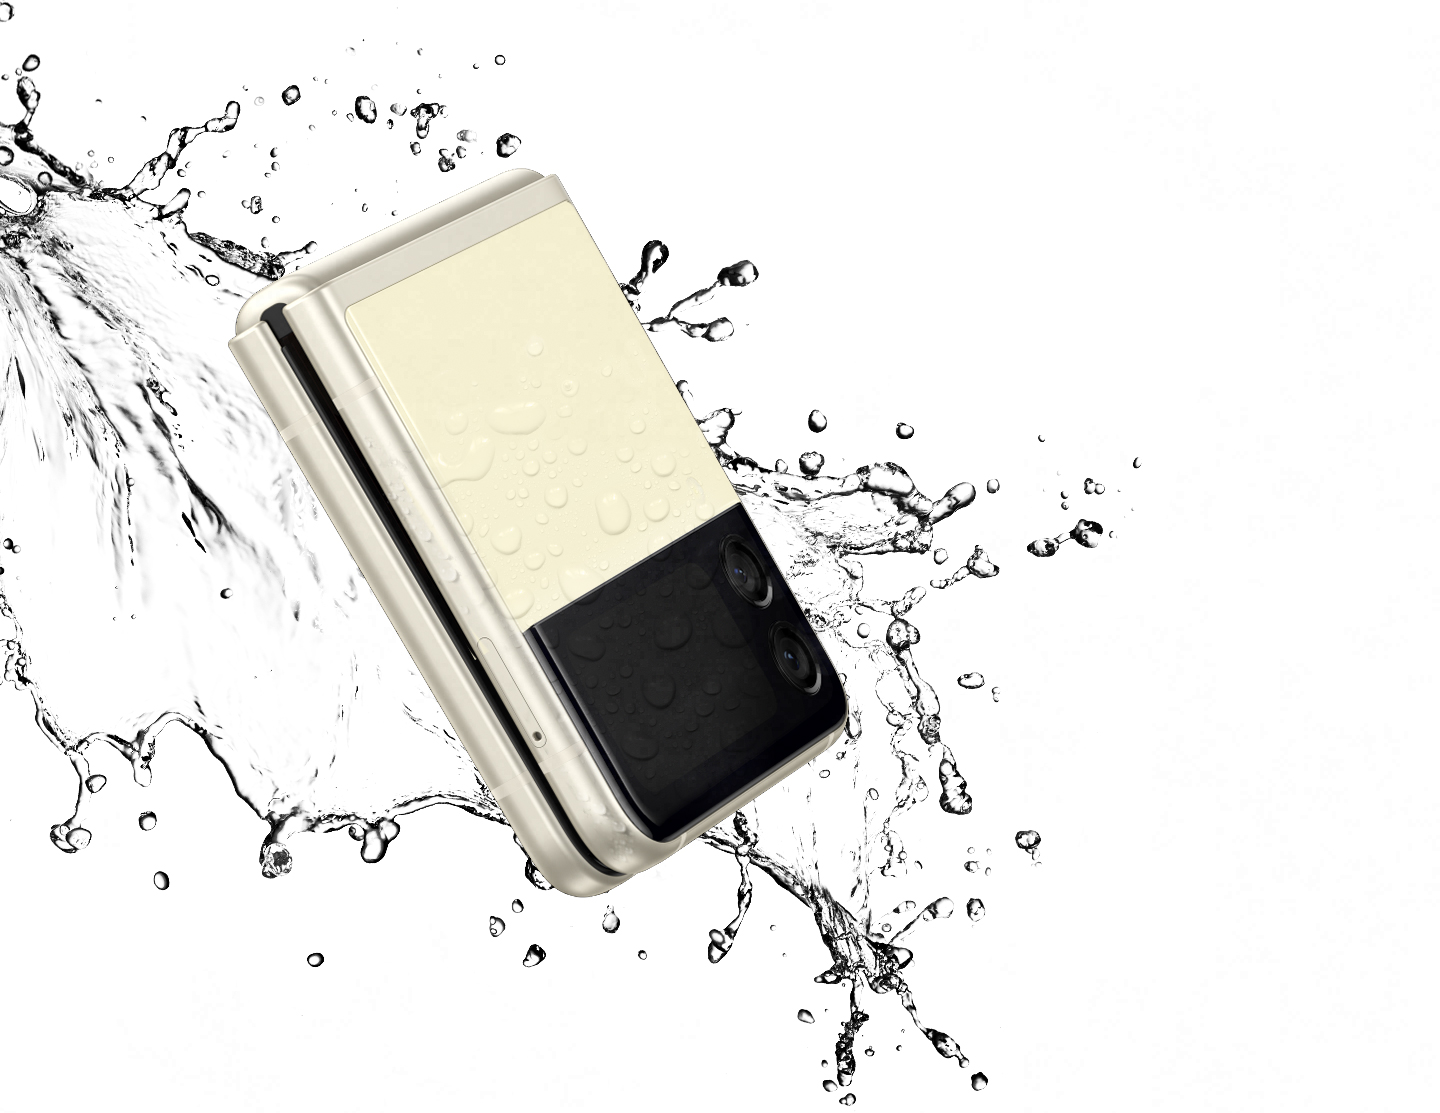 Galaxy Z Flip3 5G folded and seen from the Front Cover, surrounded by a splash of water.